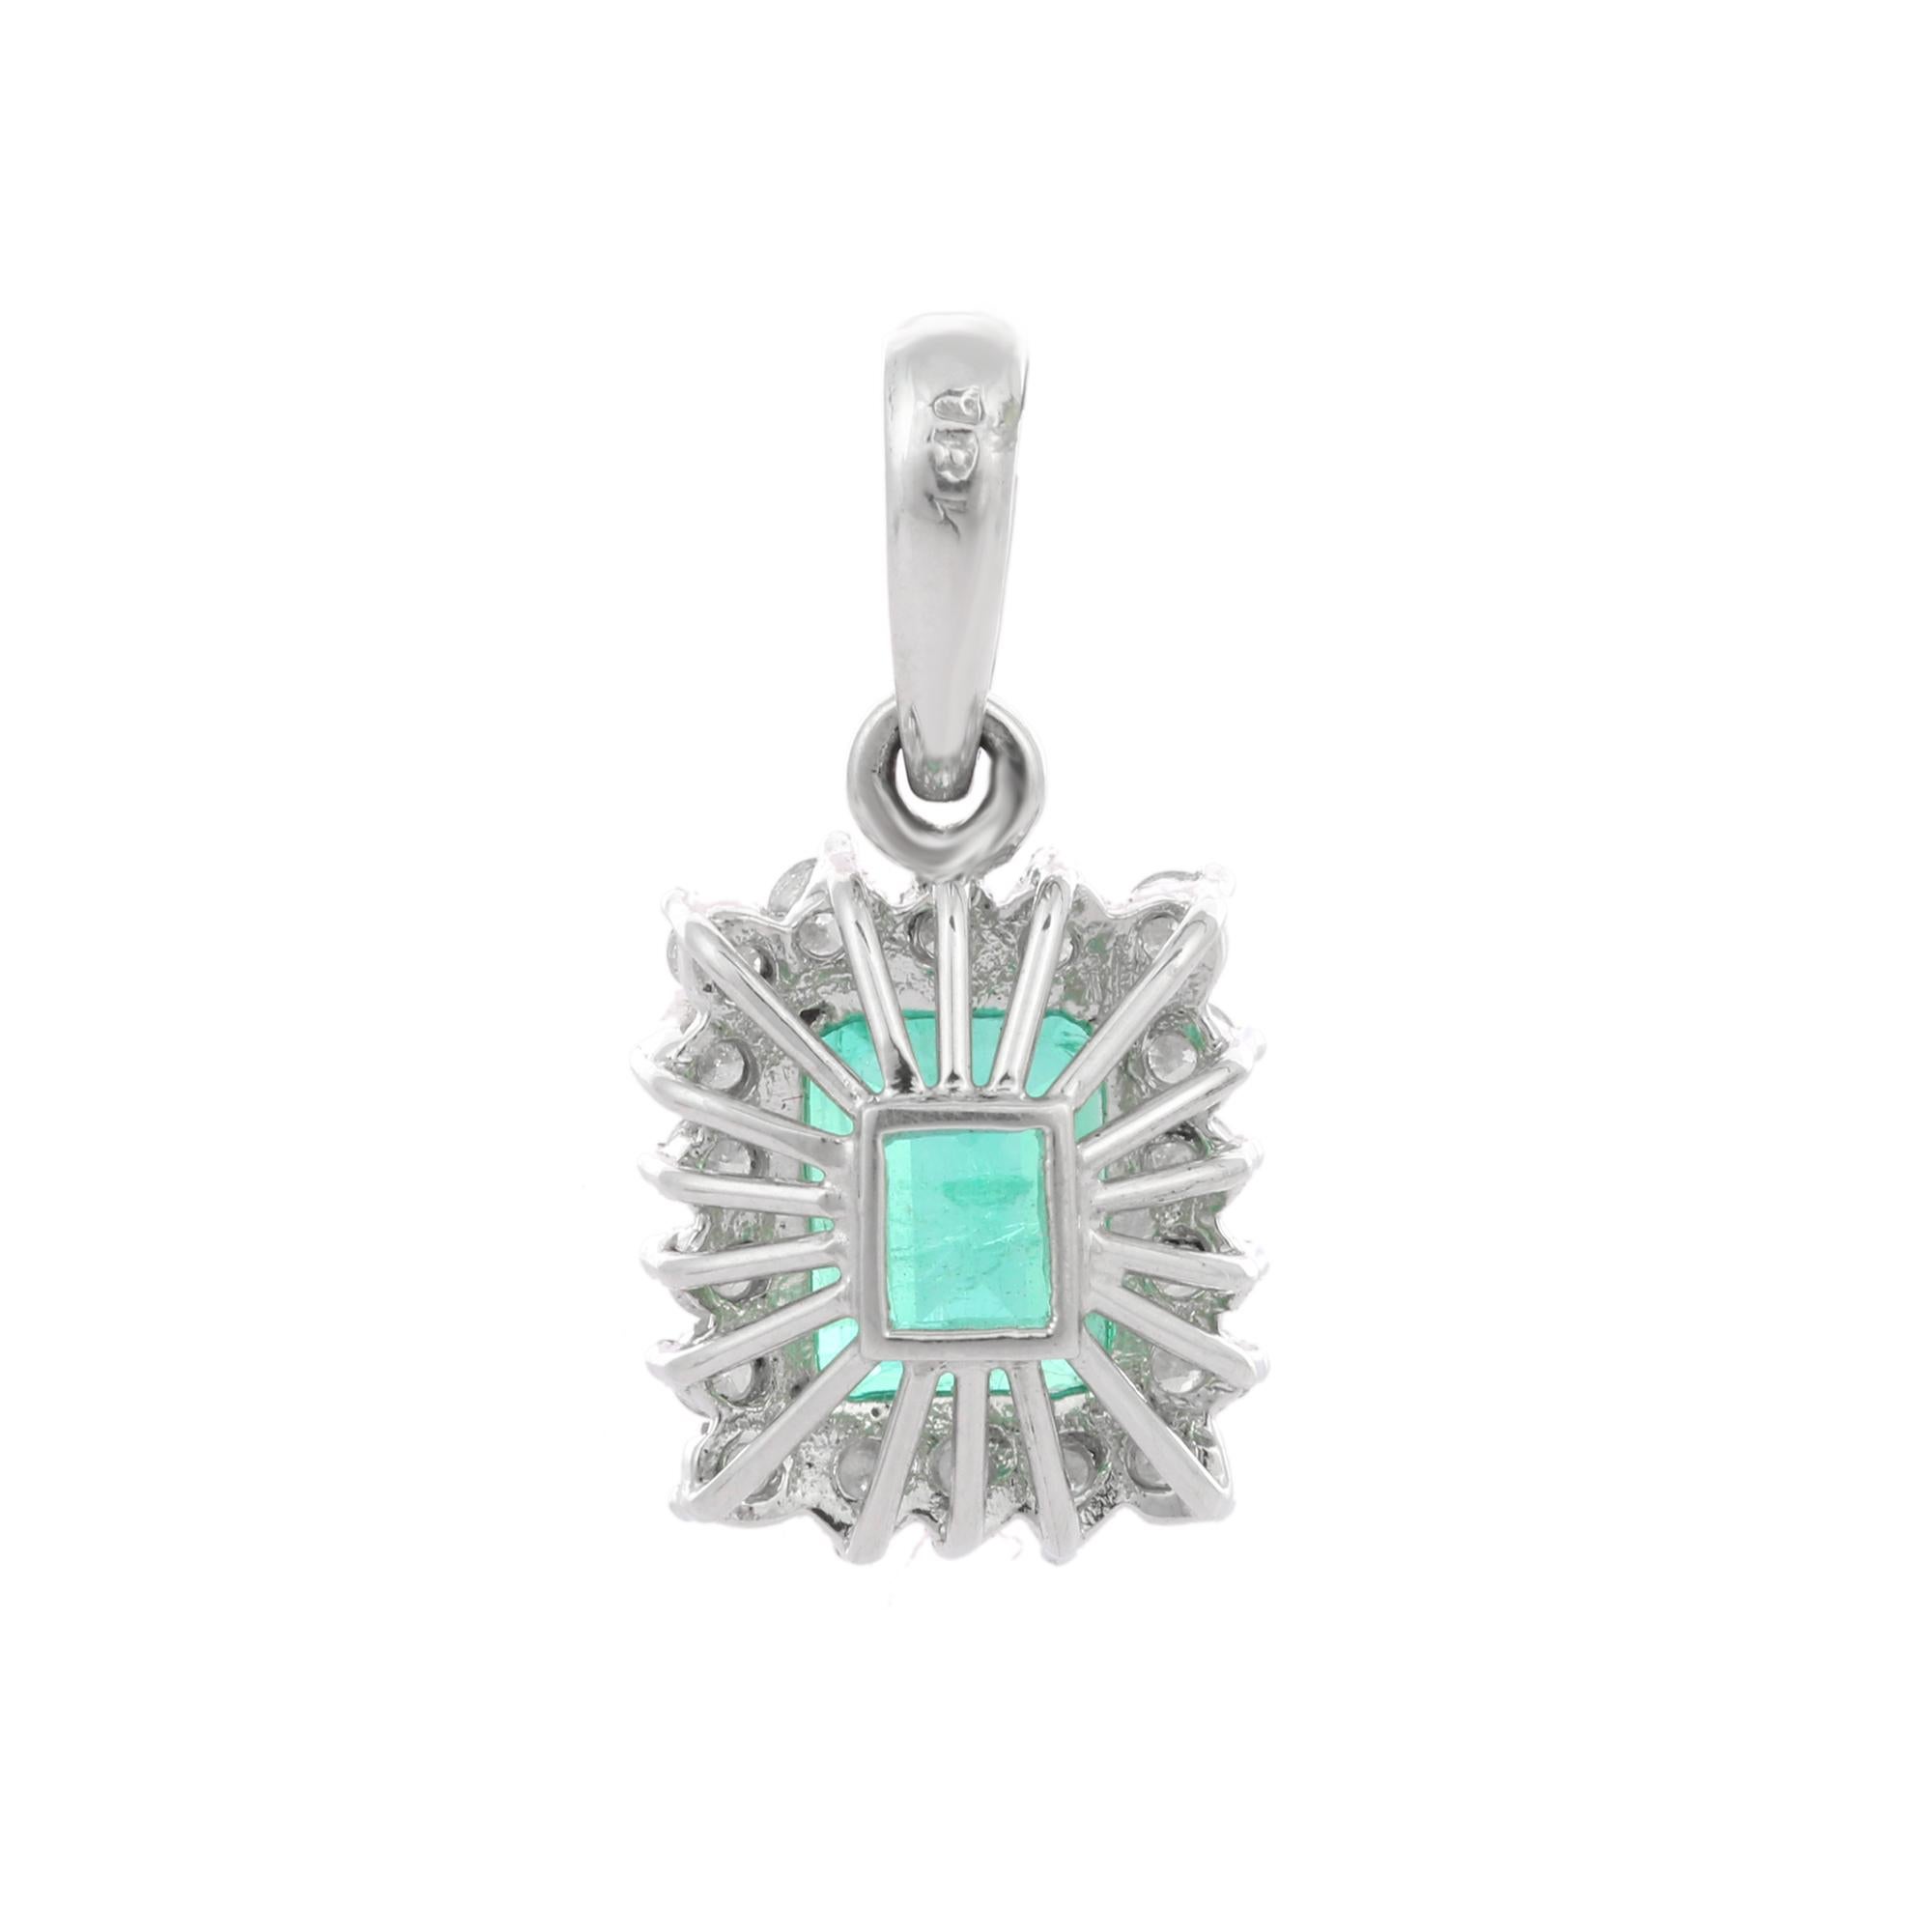 1.68 Carat Octagon Cut Emerald Pendant with Diamonds in 18K White Gold In New Condition For Sale In Houston, TX